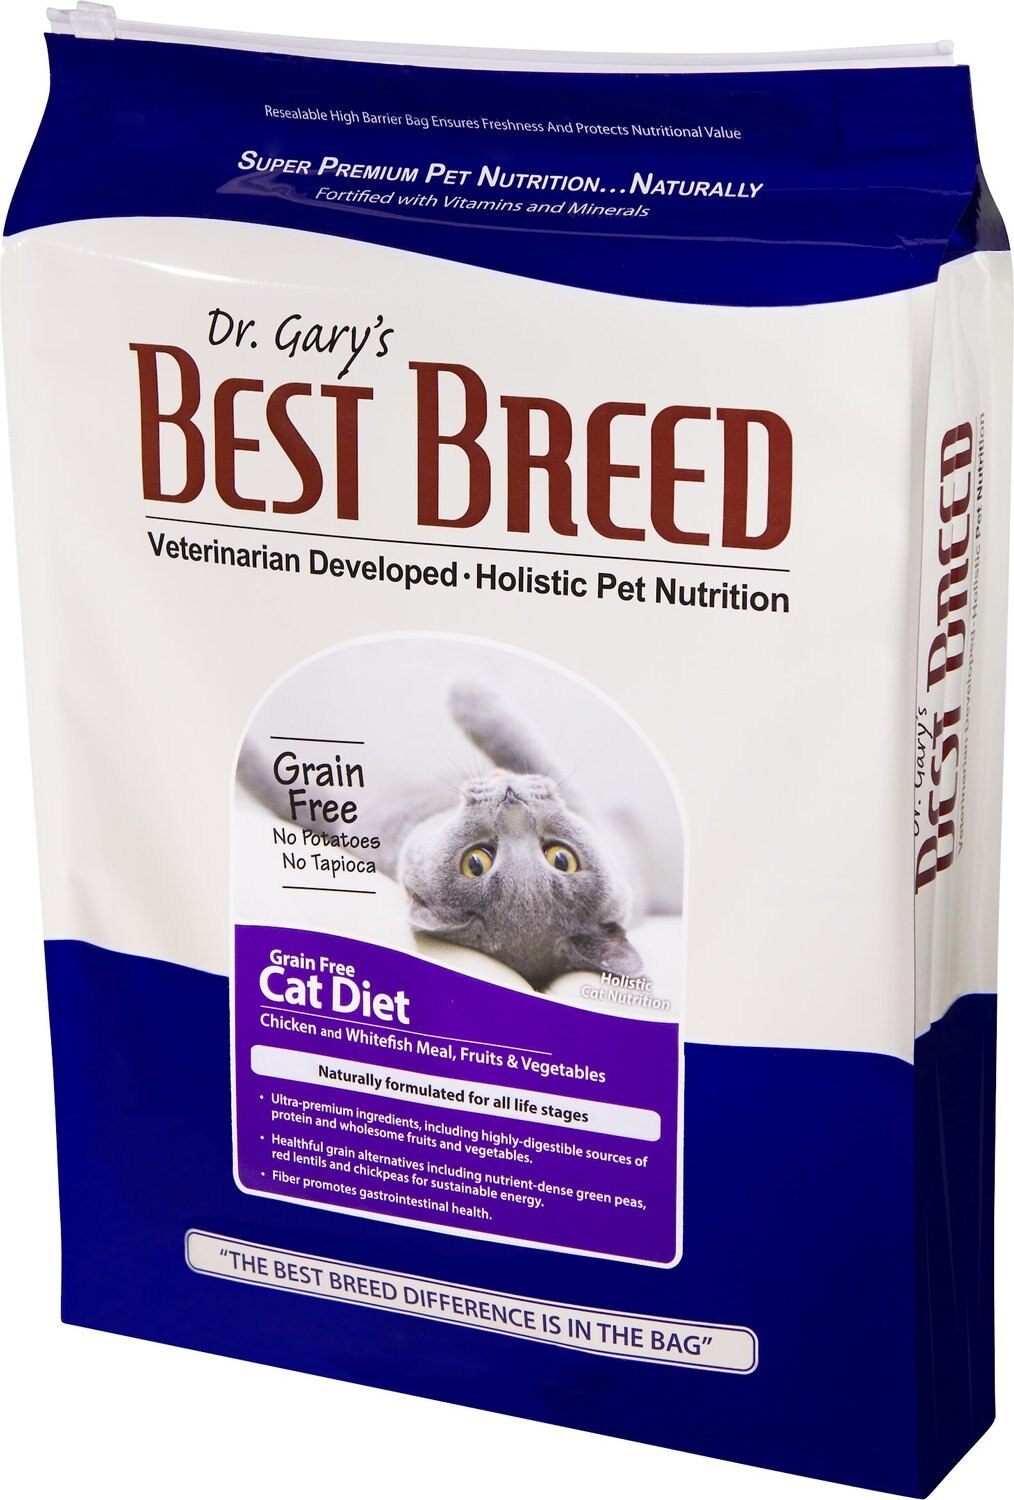 DR. GARY'S BEST BREED Holistic GrainFree All Life Stages Dry Cat Food